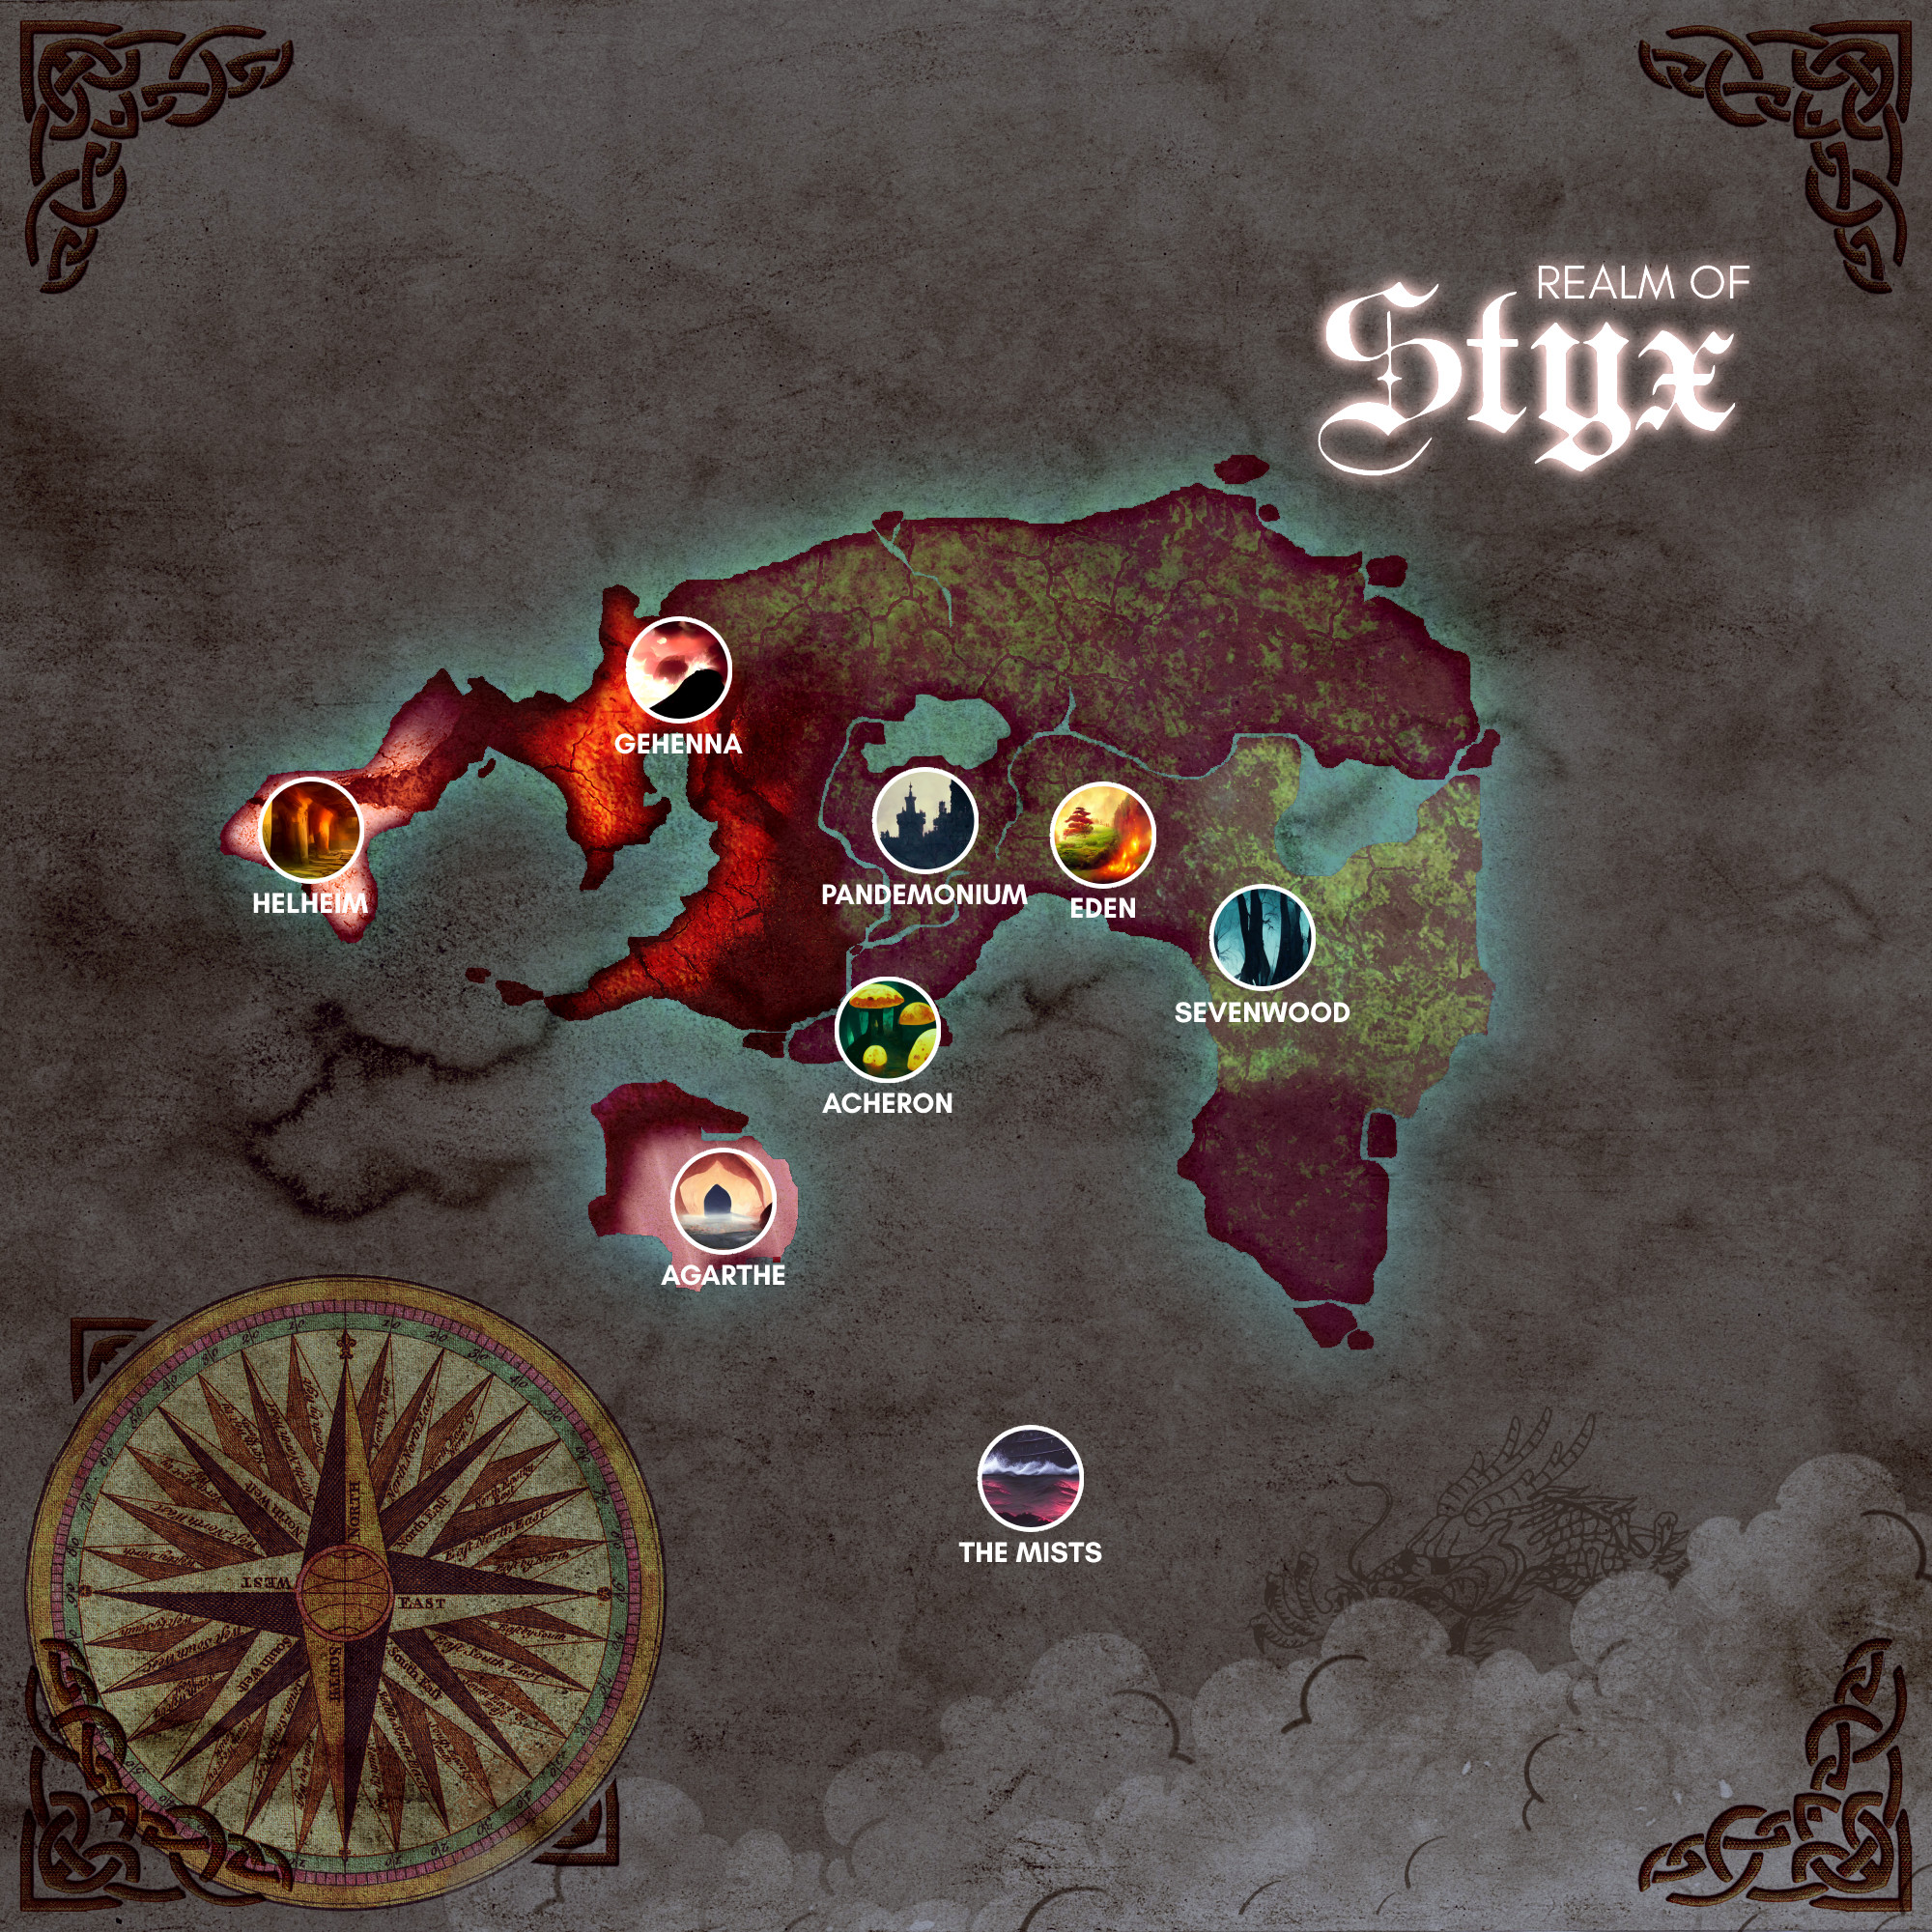 The Realm of Styx